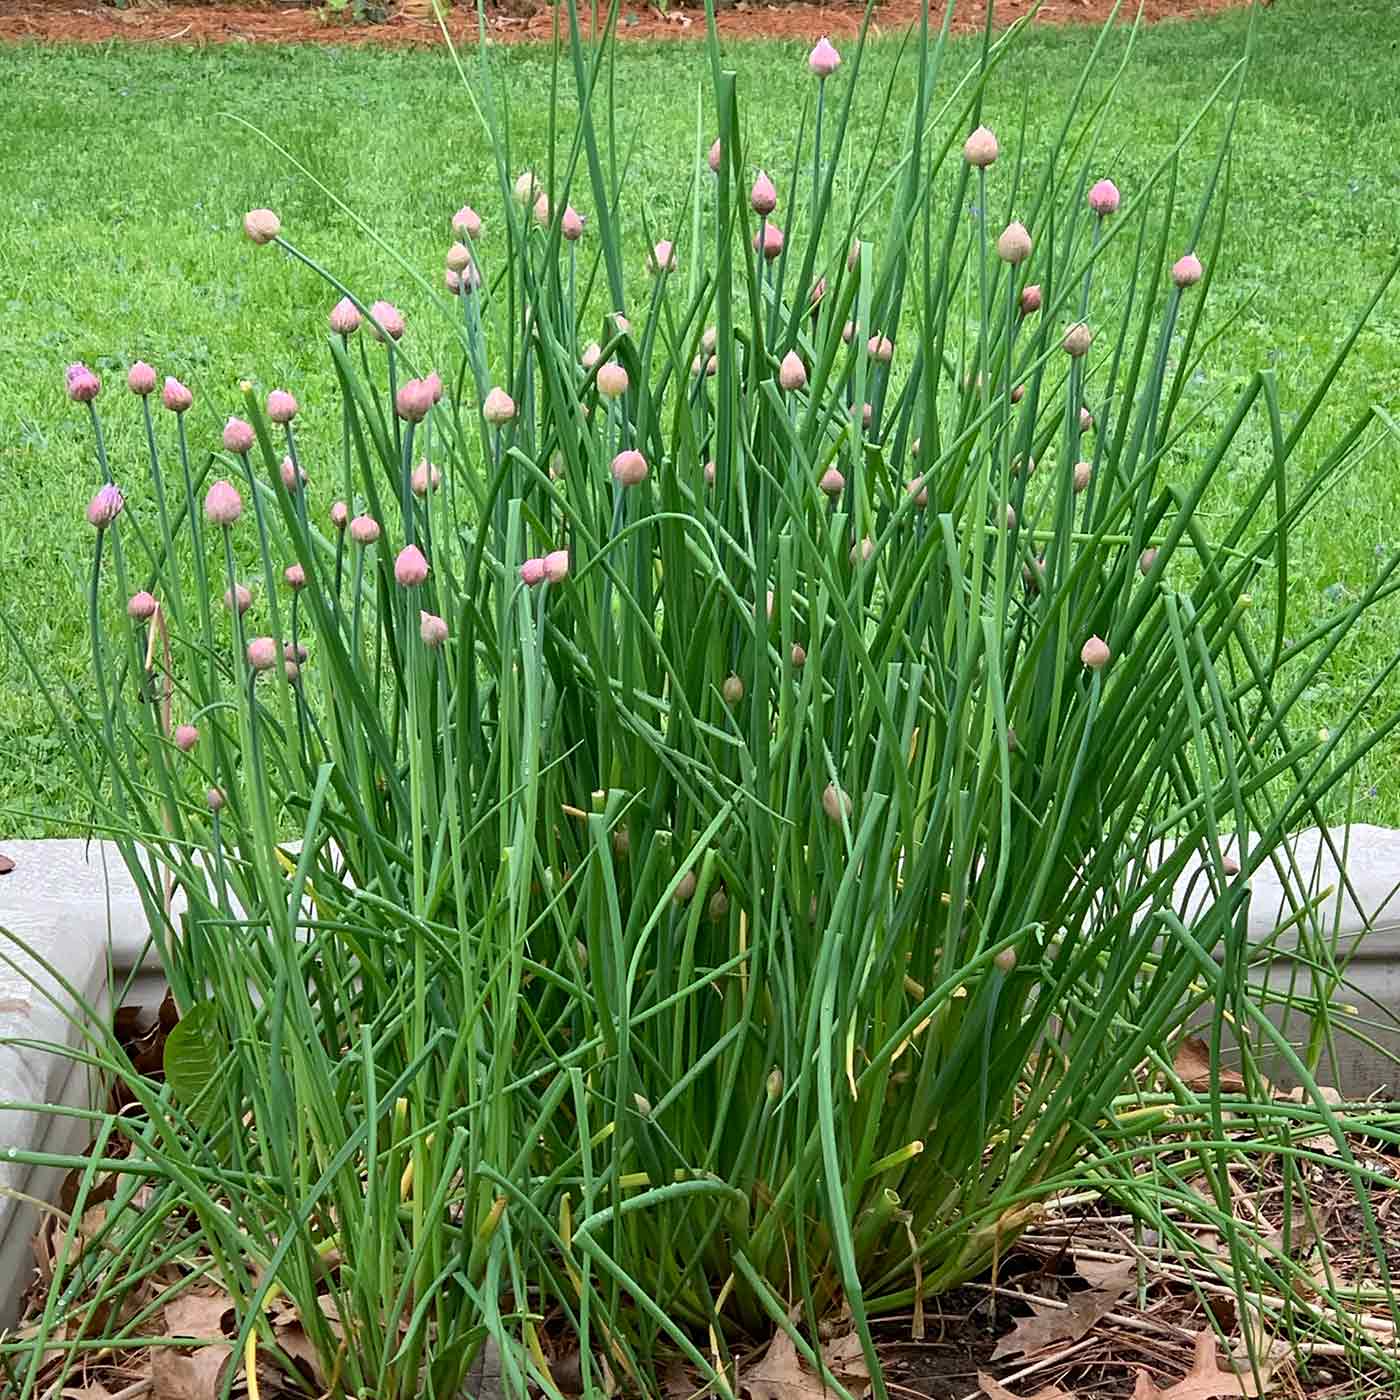 Chive plant with emerging flowers